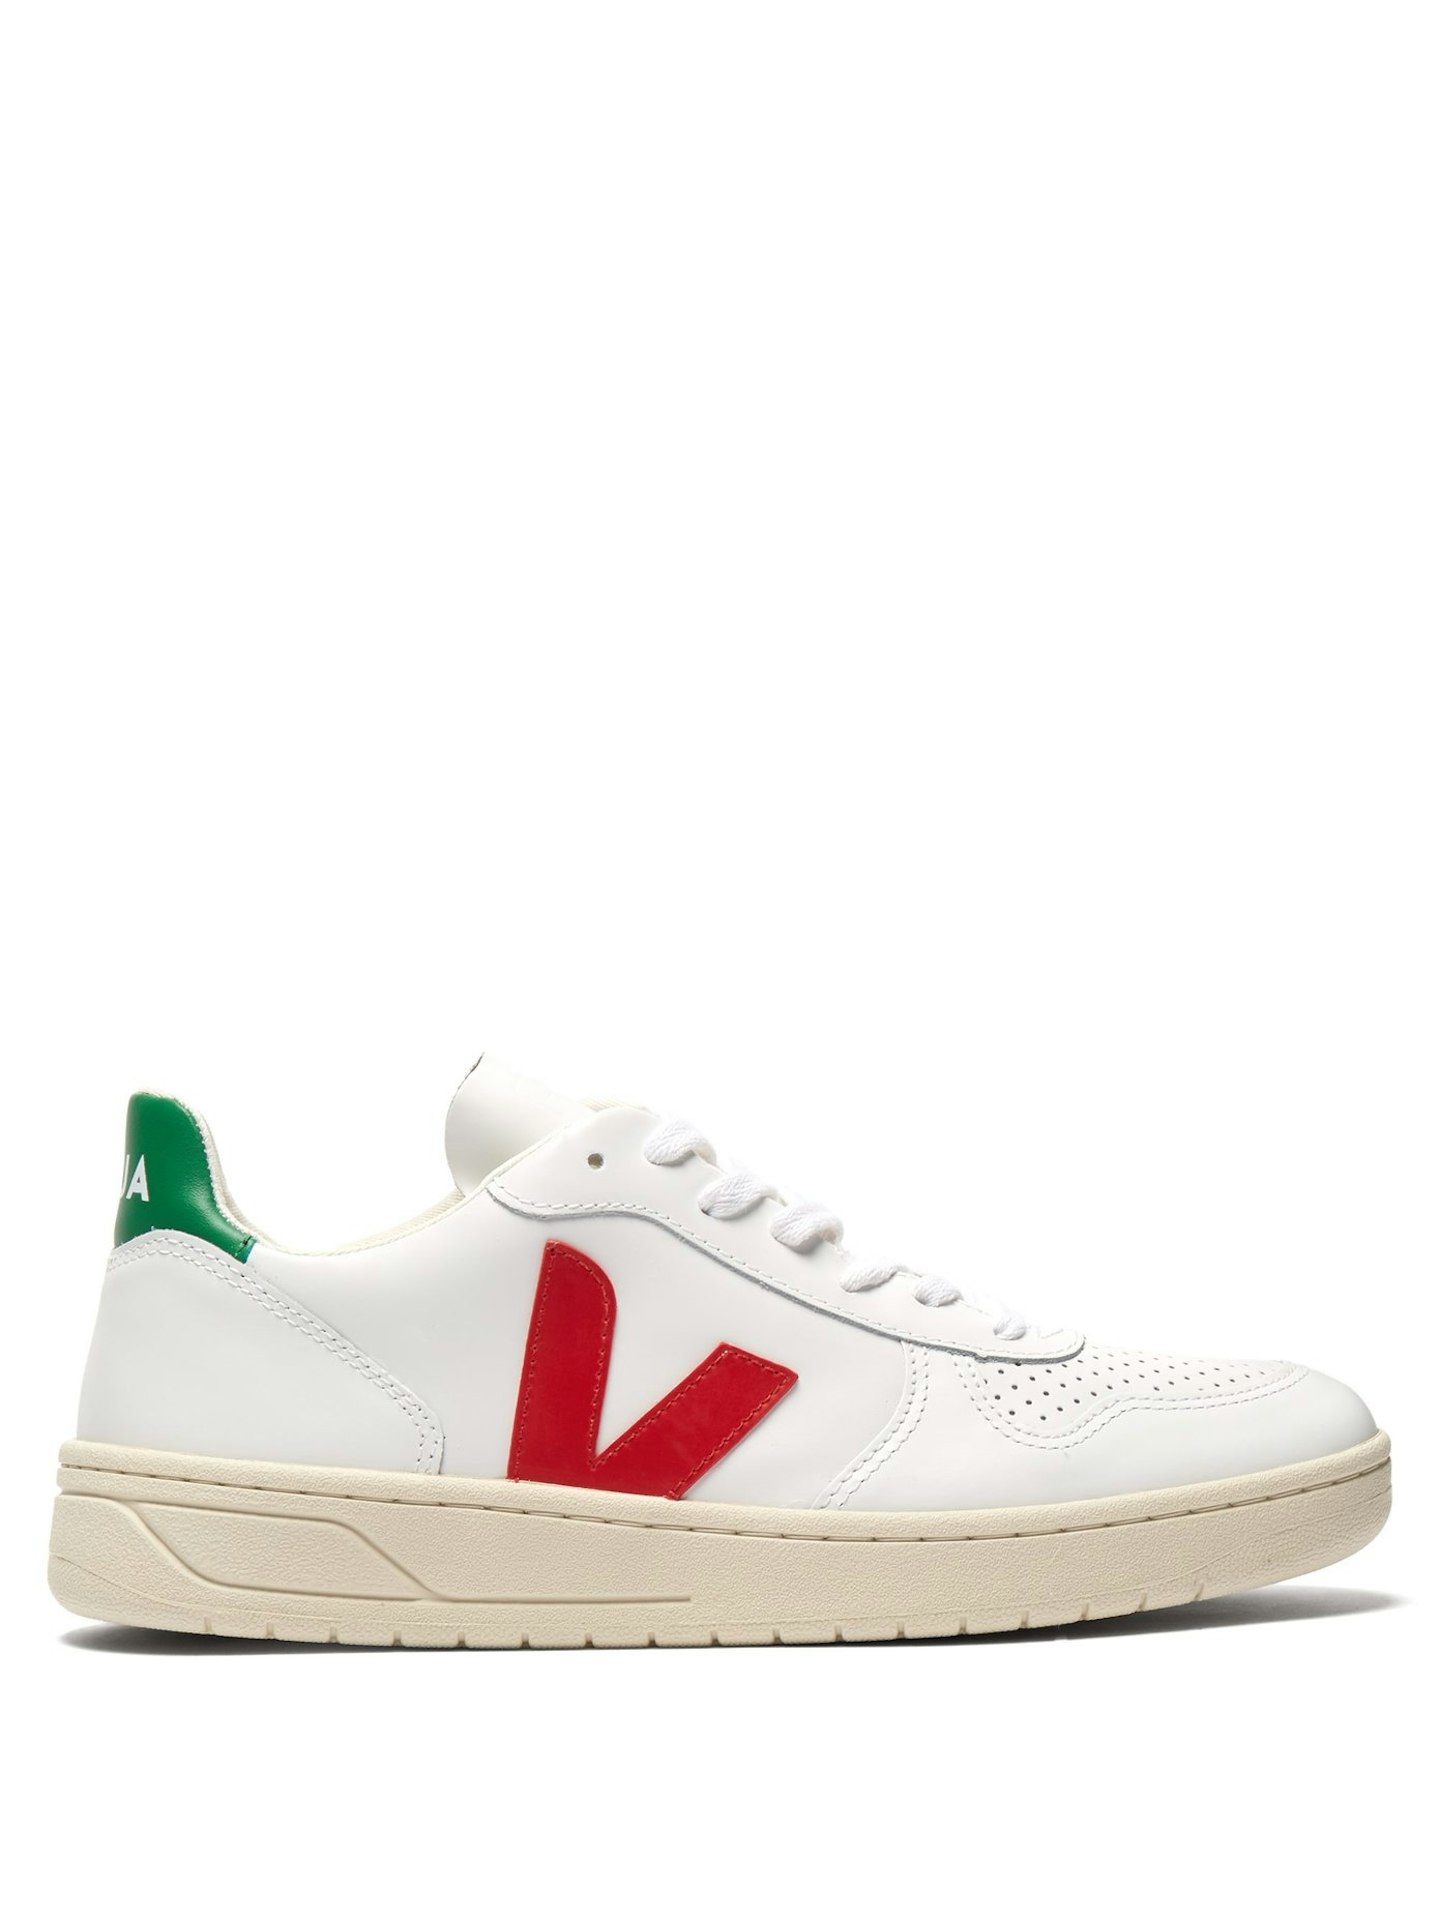 Veja, V-10 Low-Top Leather Trainers, £115, Matchesfashion.com